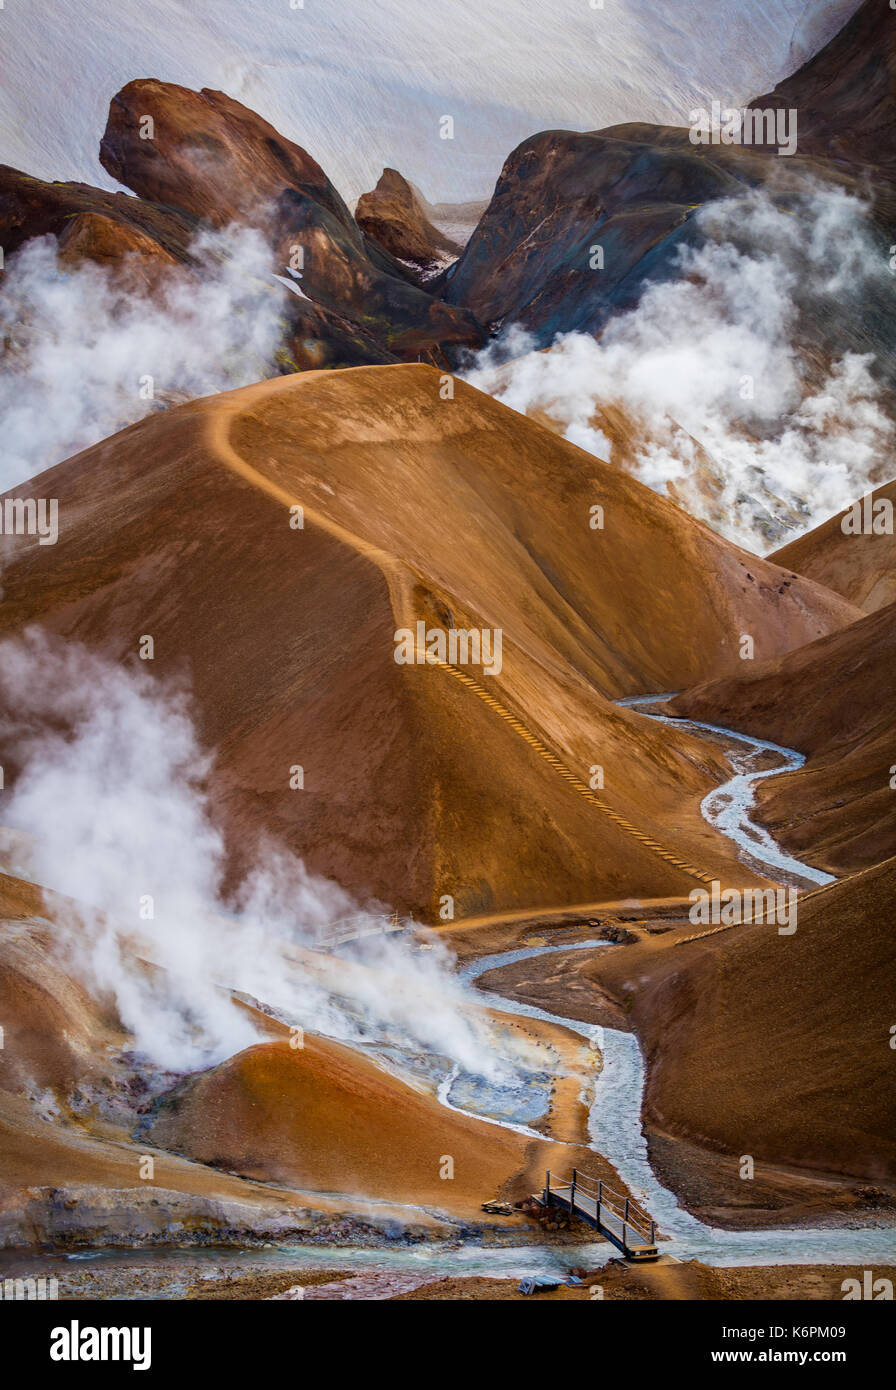 Kerlingarfjöll is a 1,477 m (4,846 ft)) tall mountain range in Iceland situated in the Highlands of Iceland near the Kjölur highland road. Stock Photo